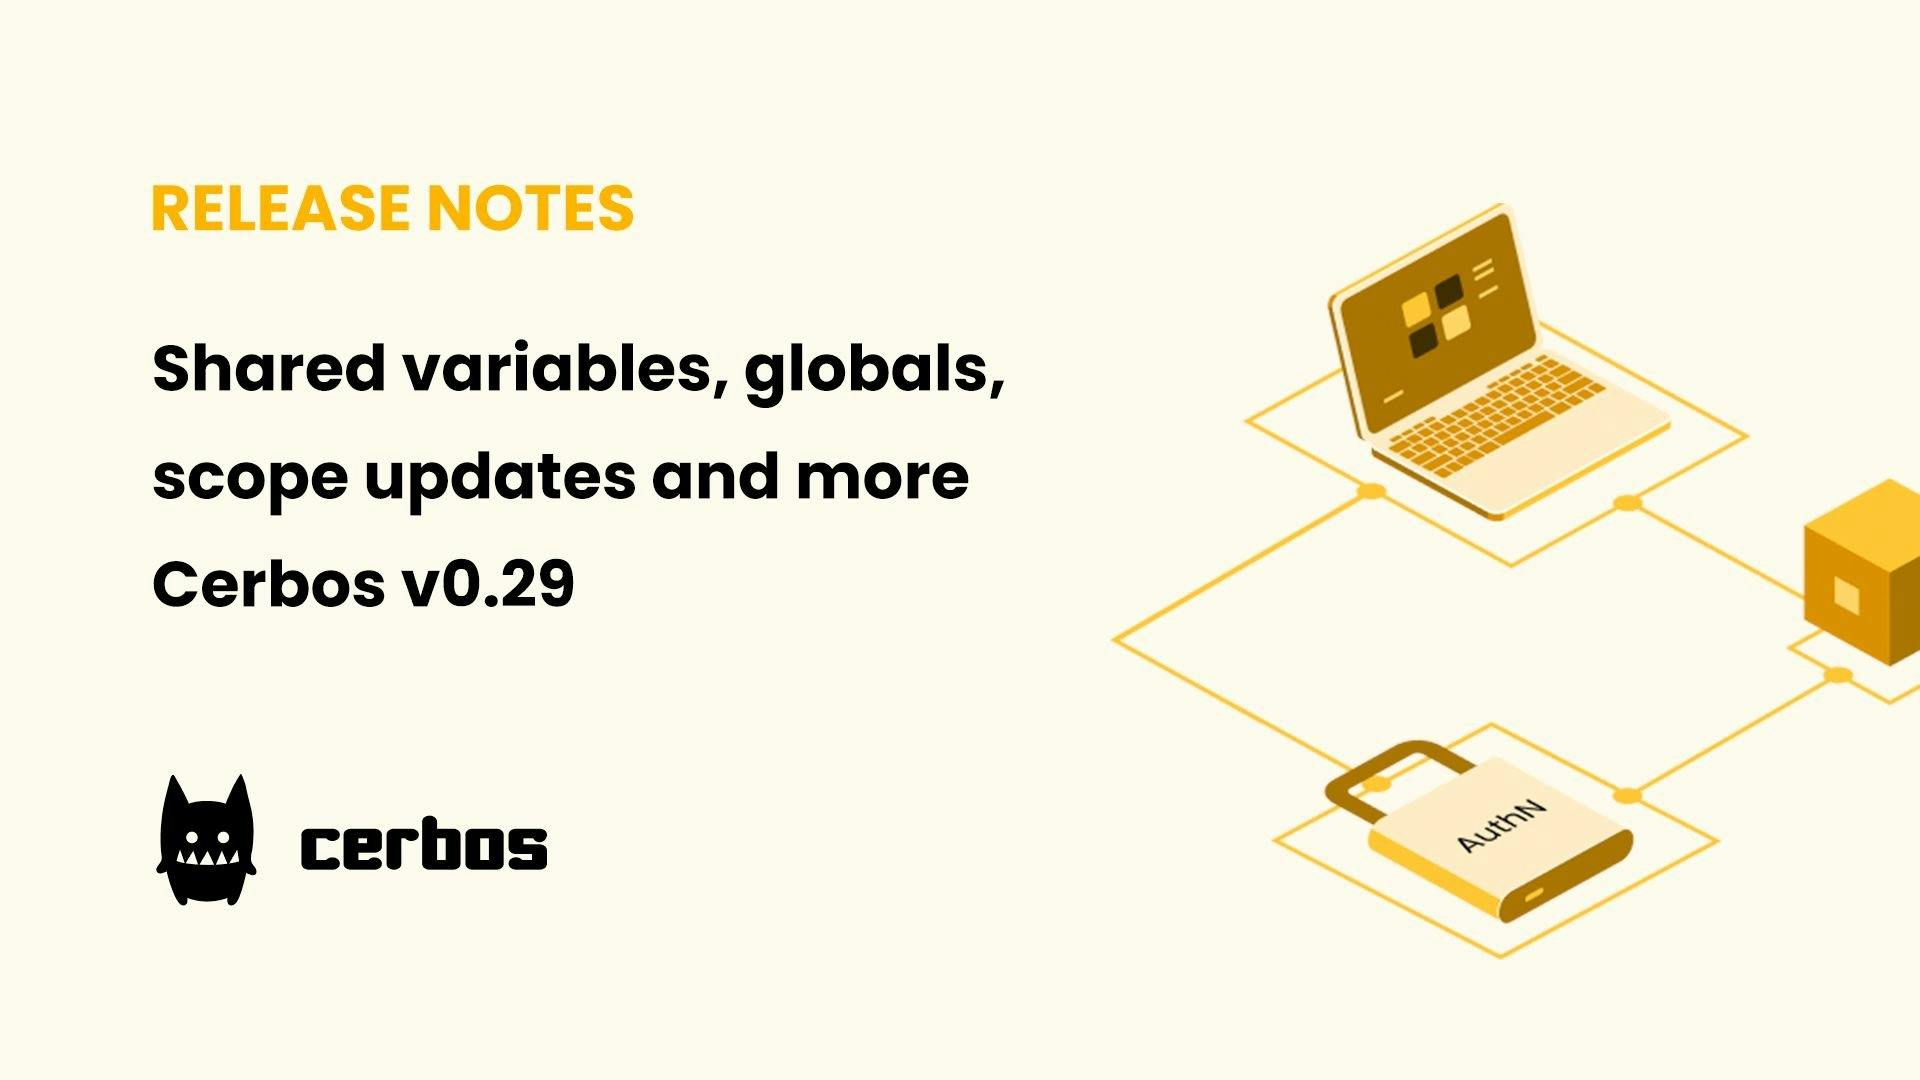 Shared variables, globals, scope updates and more  - Cerbos v0.29